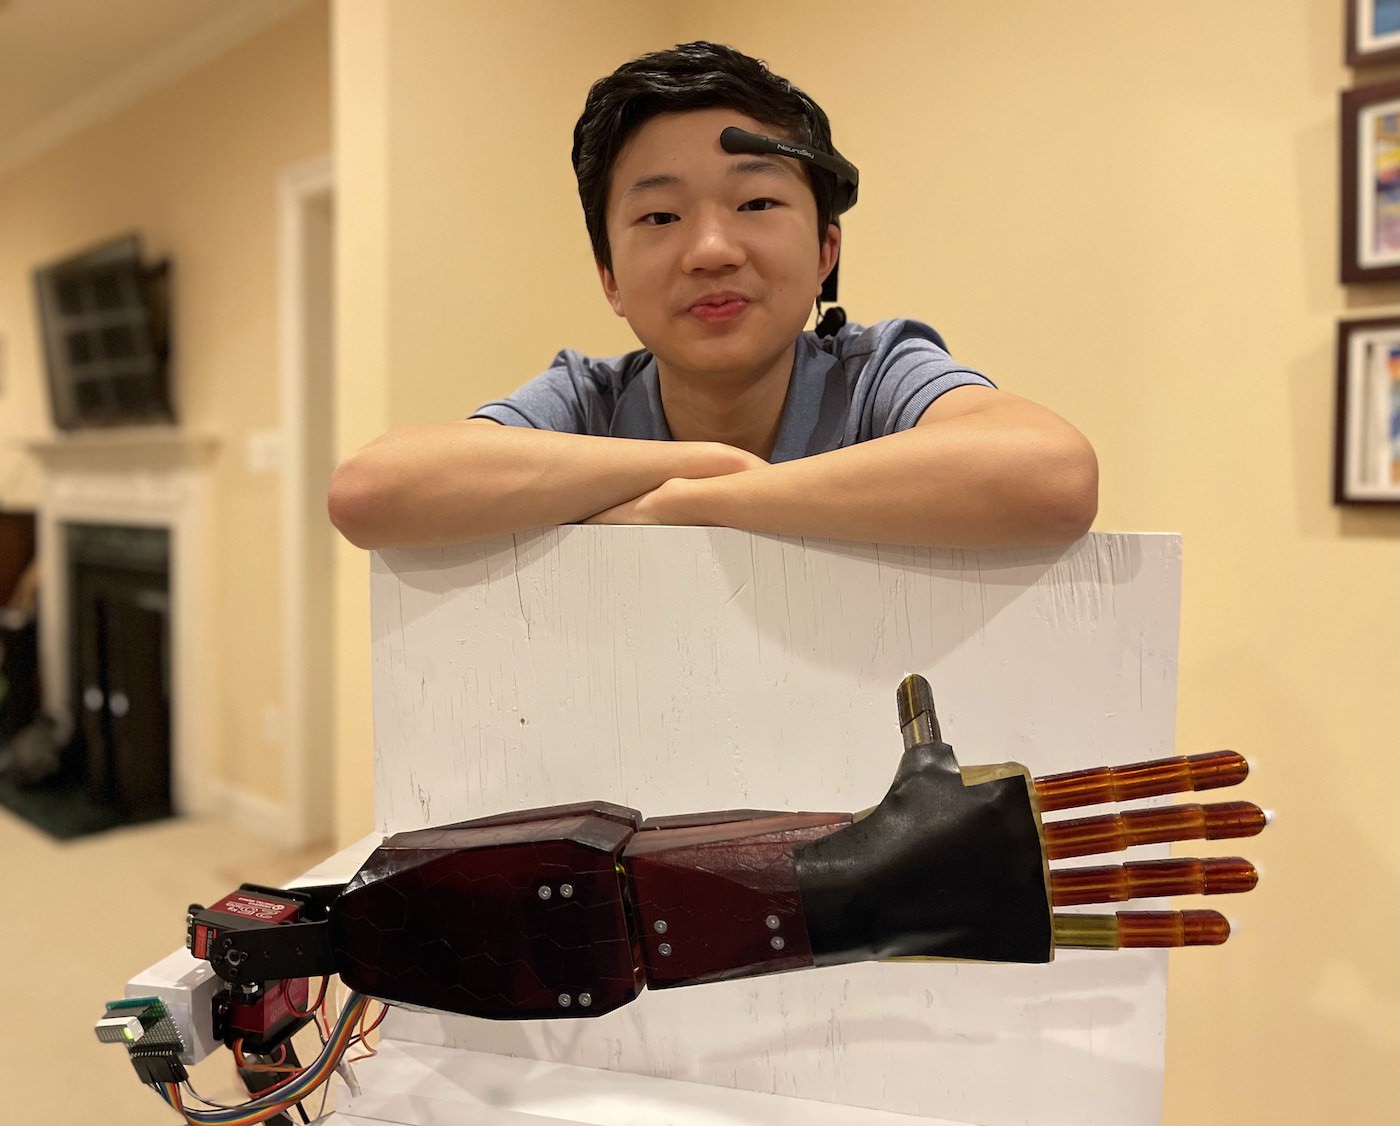 A teenage boy looks at the camera with a clever grin, wearing a device that looks like a telecommunication headset pressed to his forehead. He rests his elbows on a white stand, in front of which lies a robotic arm.